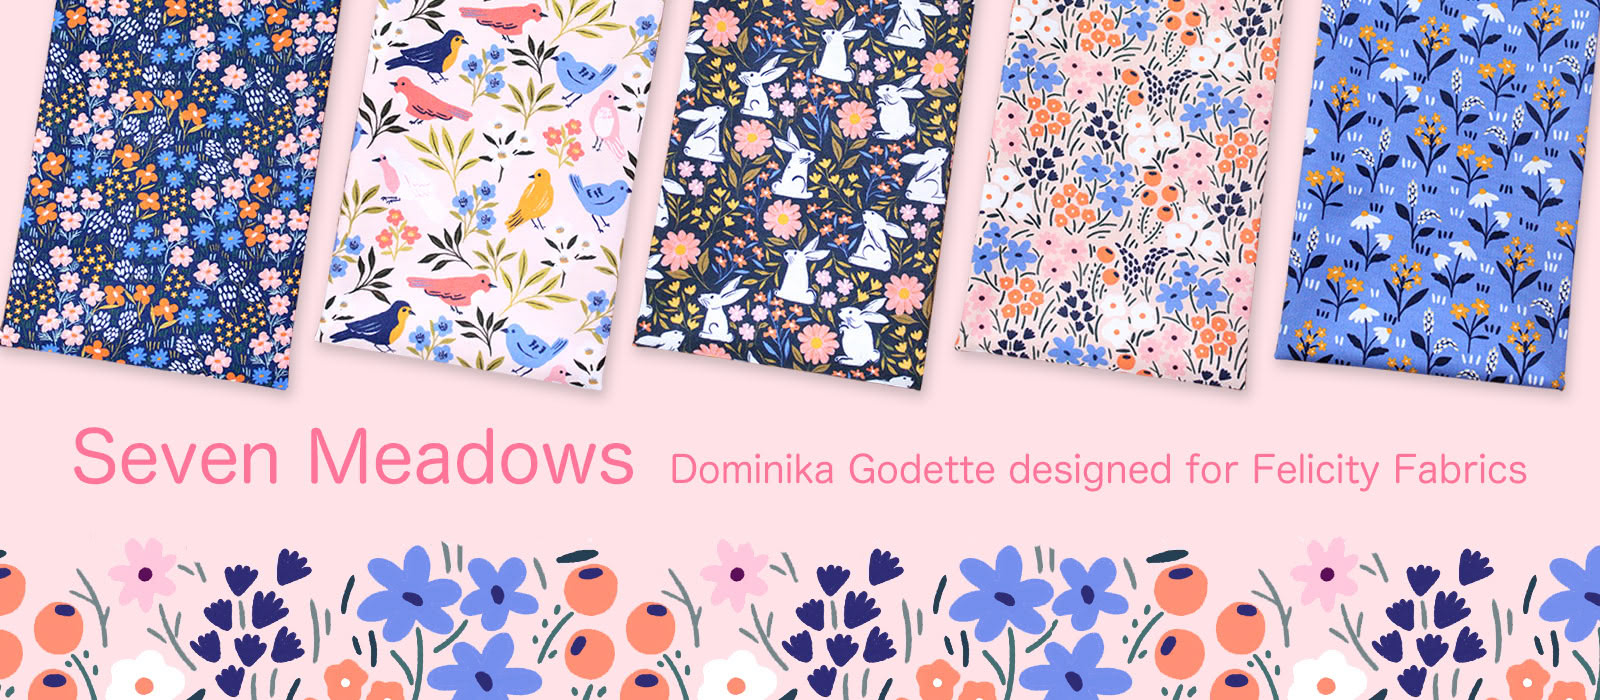 Felicity Fabrics Seven Meadows Collection by Dominika Godette